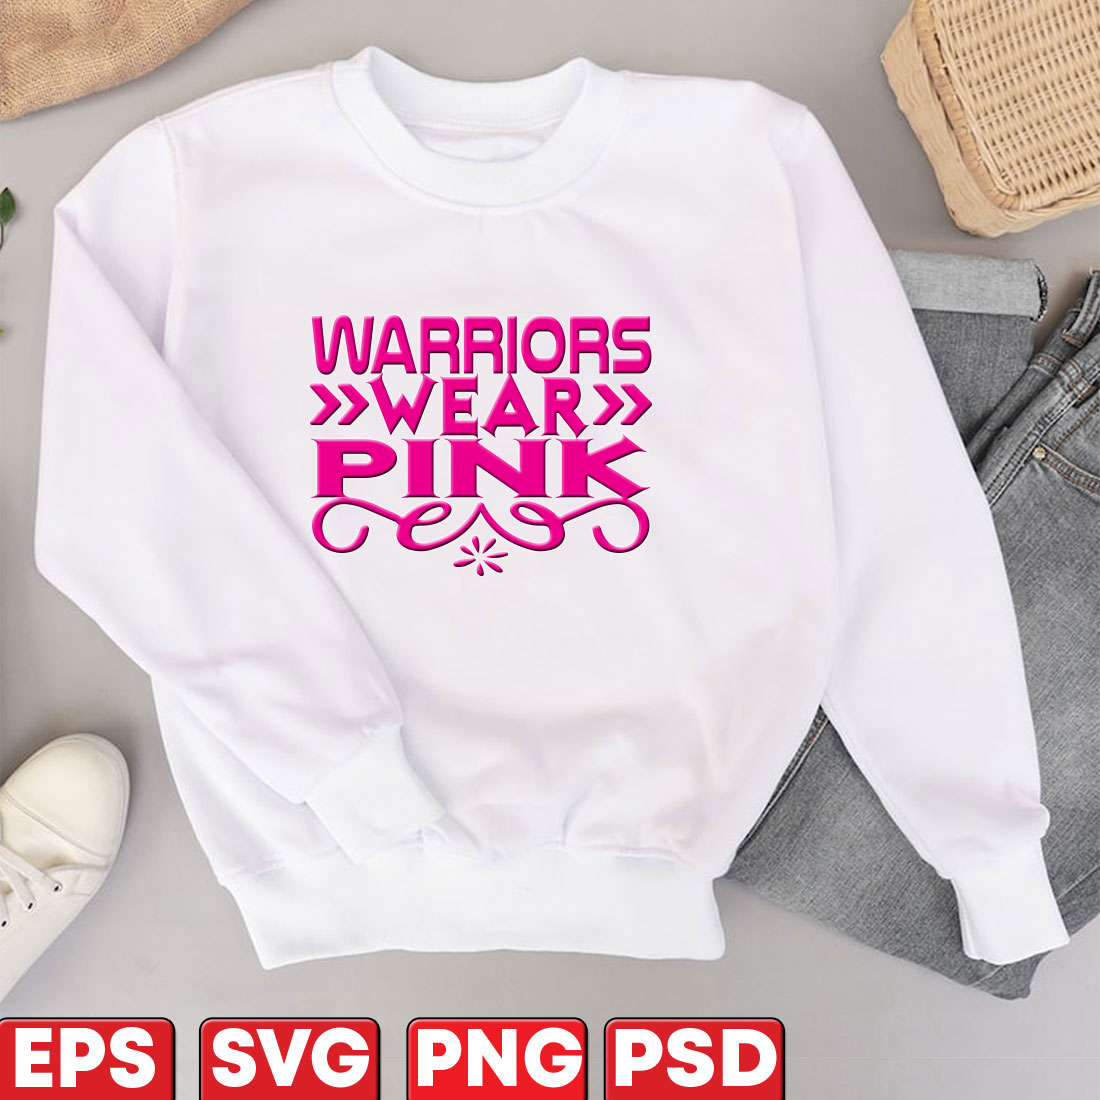 Warriors-Wear-pink cover image.